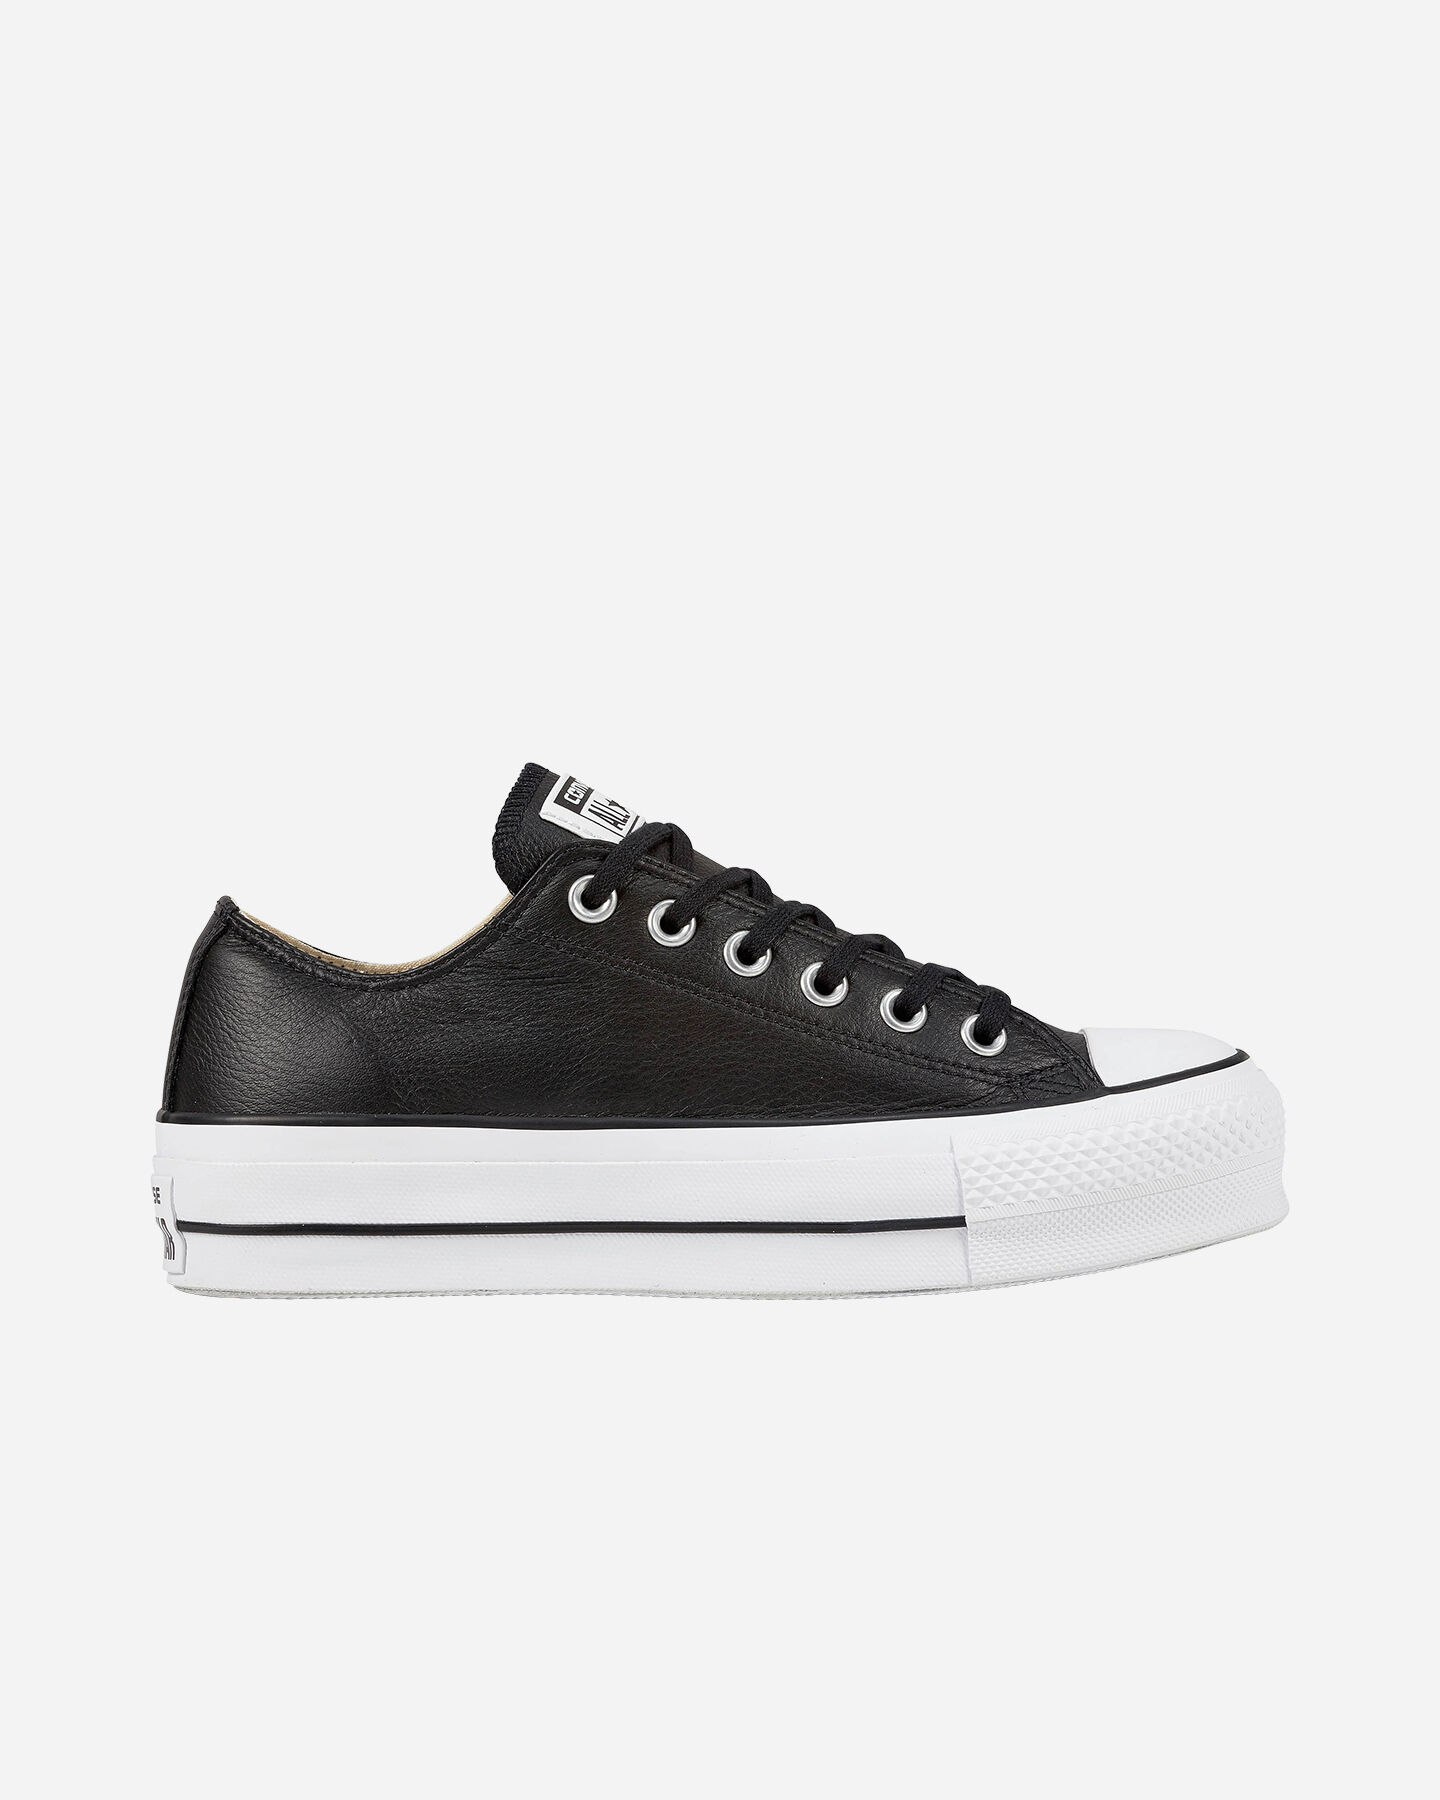  Scarpe sneakers CONVERSE ALL STAR PLATFORM LEATHER OX W S4051914|1|5,5 scatto 0